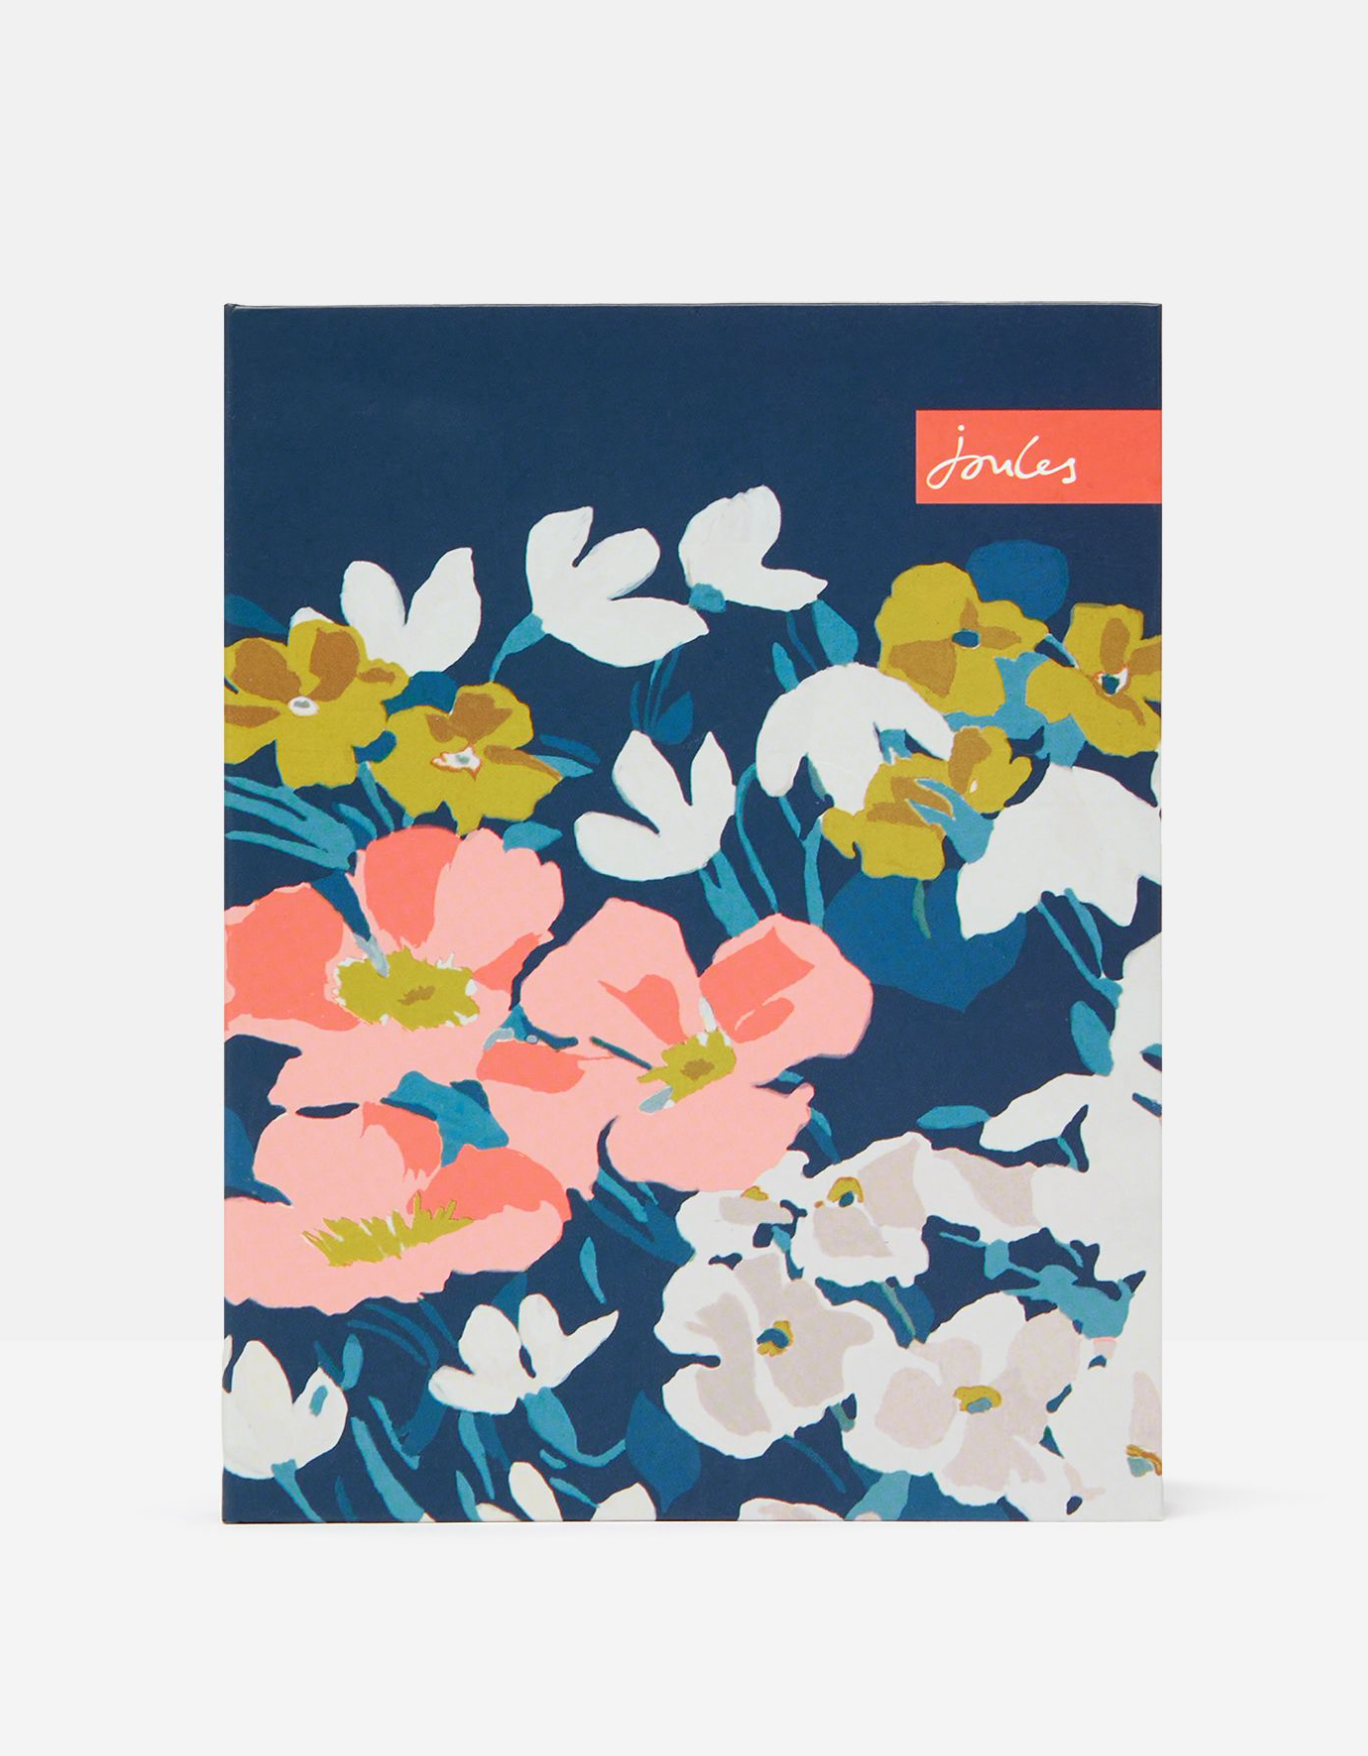 Joules Sticky Notes & List Pad Set